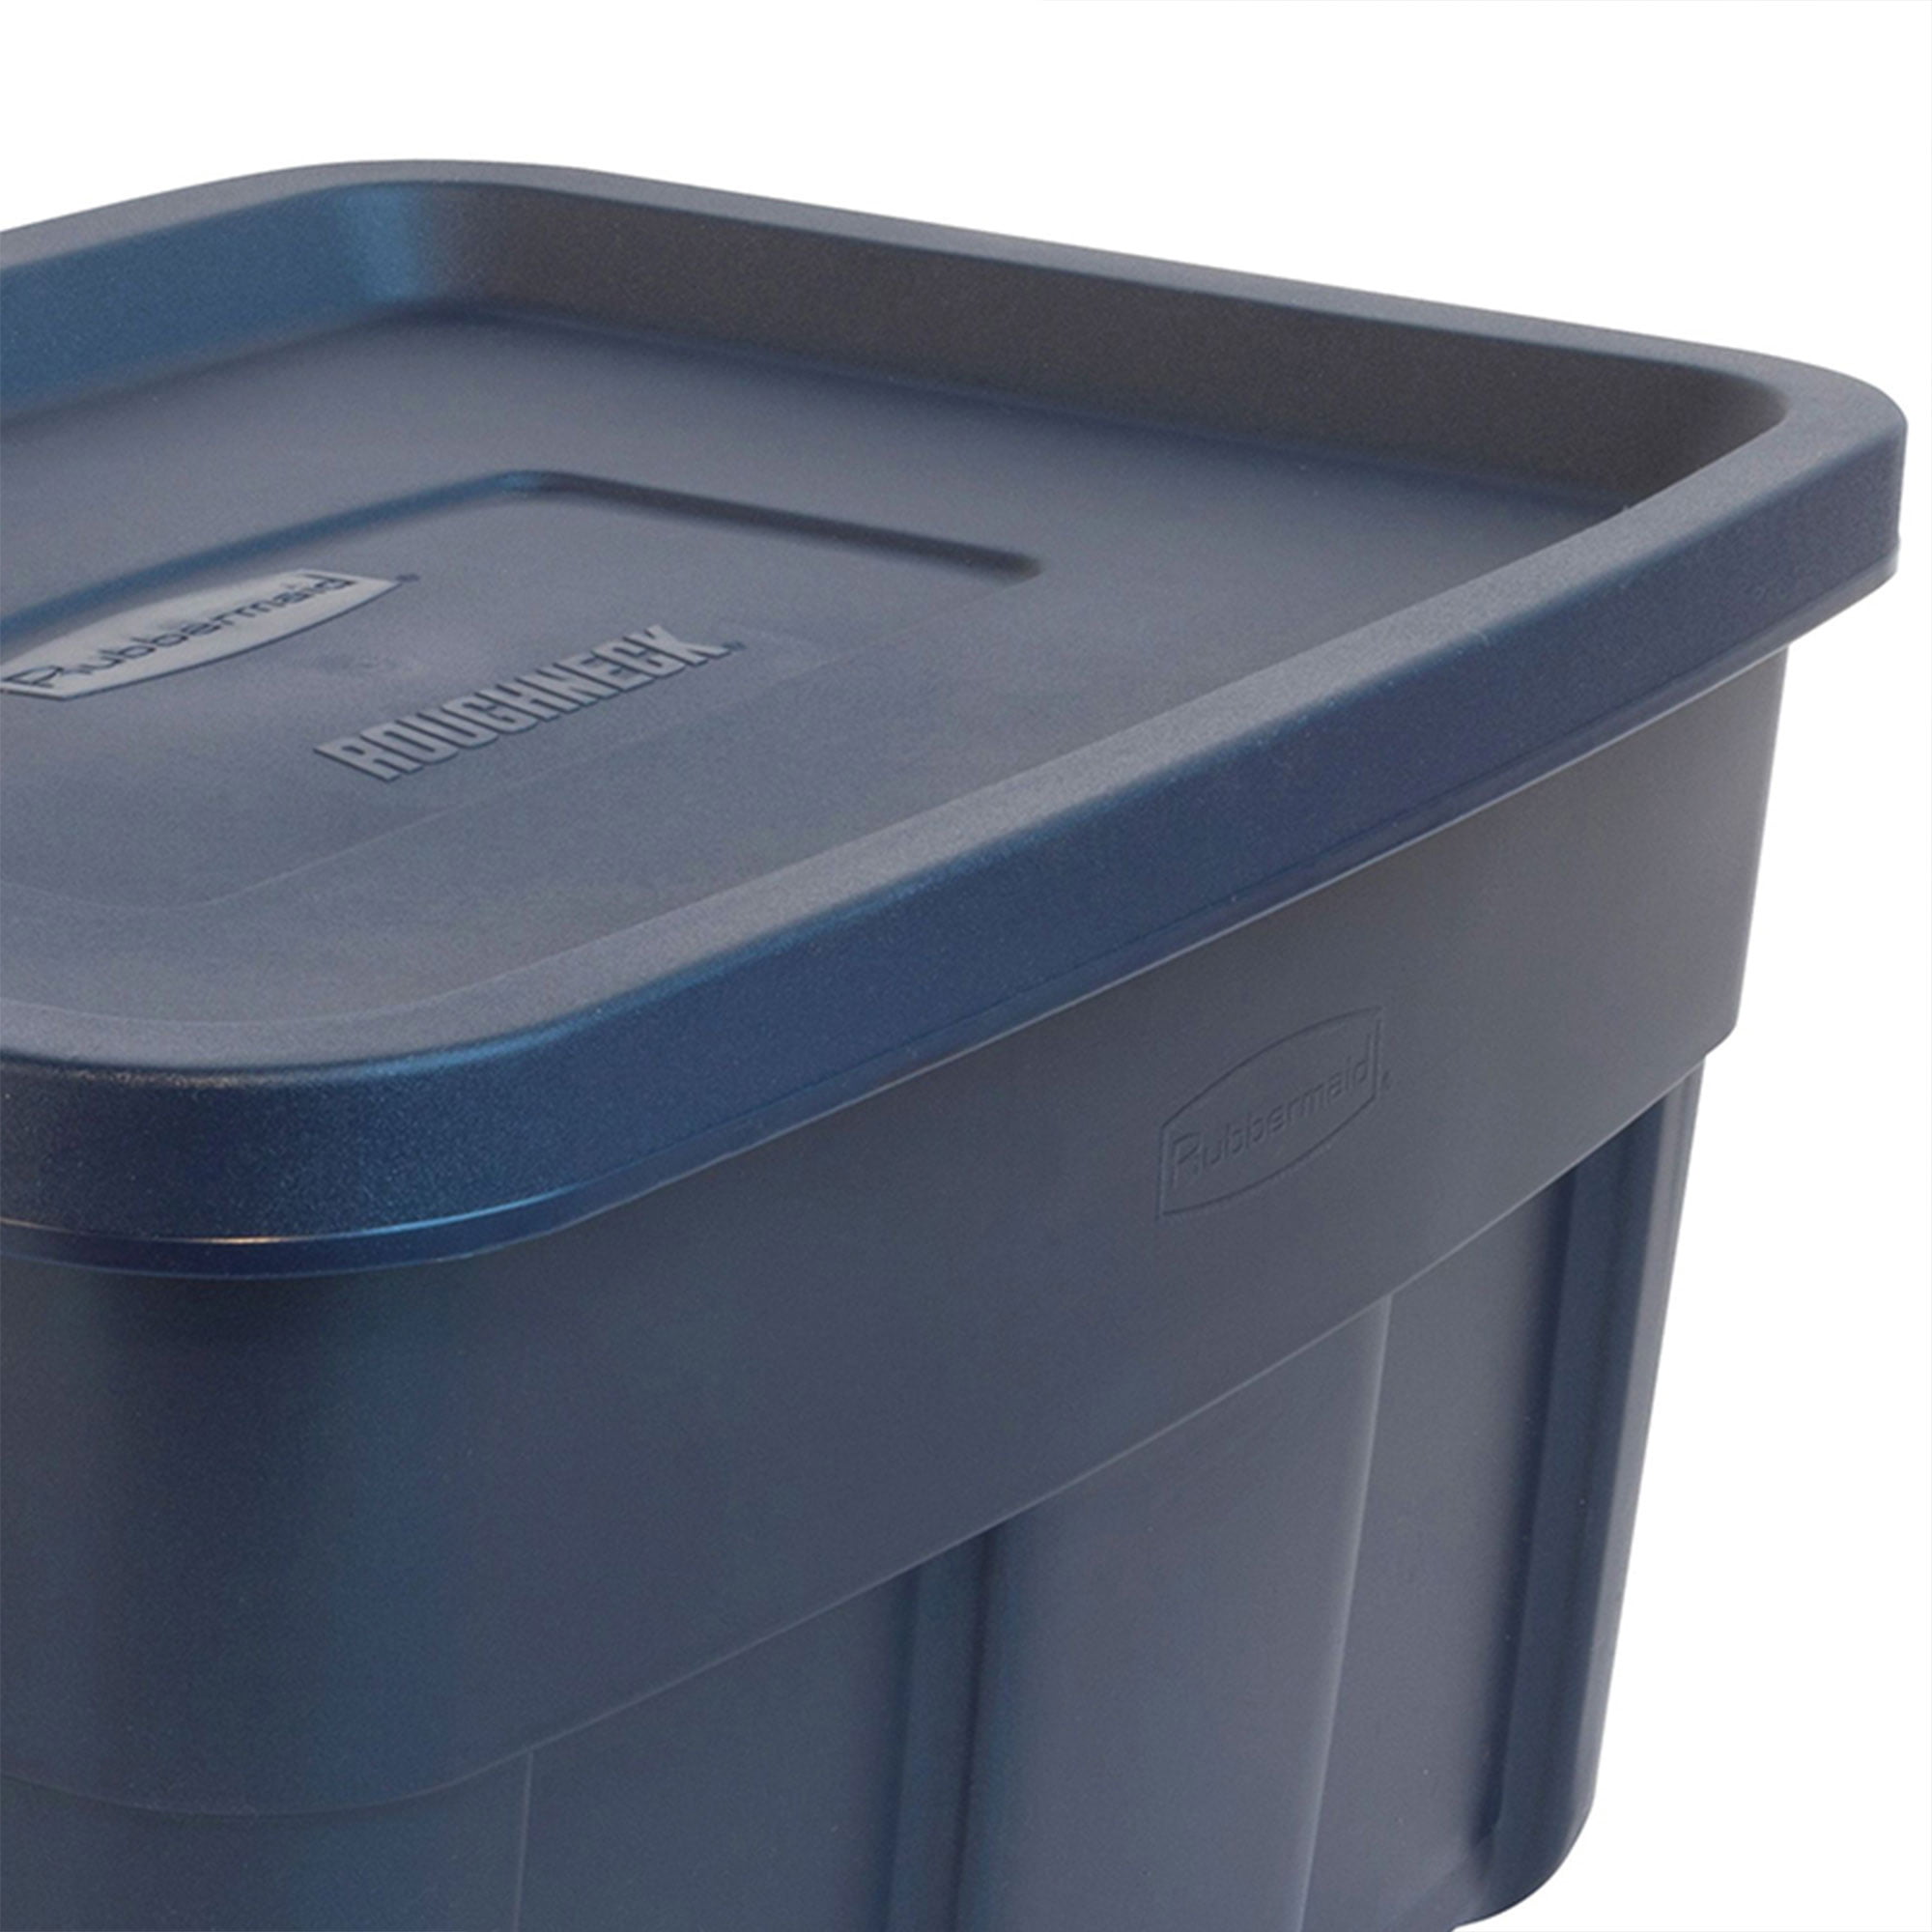 Rubbermaid Roughneck? Storage Totes 31 Gal, Large Durable Stackable  Containers, Great for Clothing, Seasonal Décor, Sports Equipment, and More  Dark